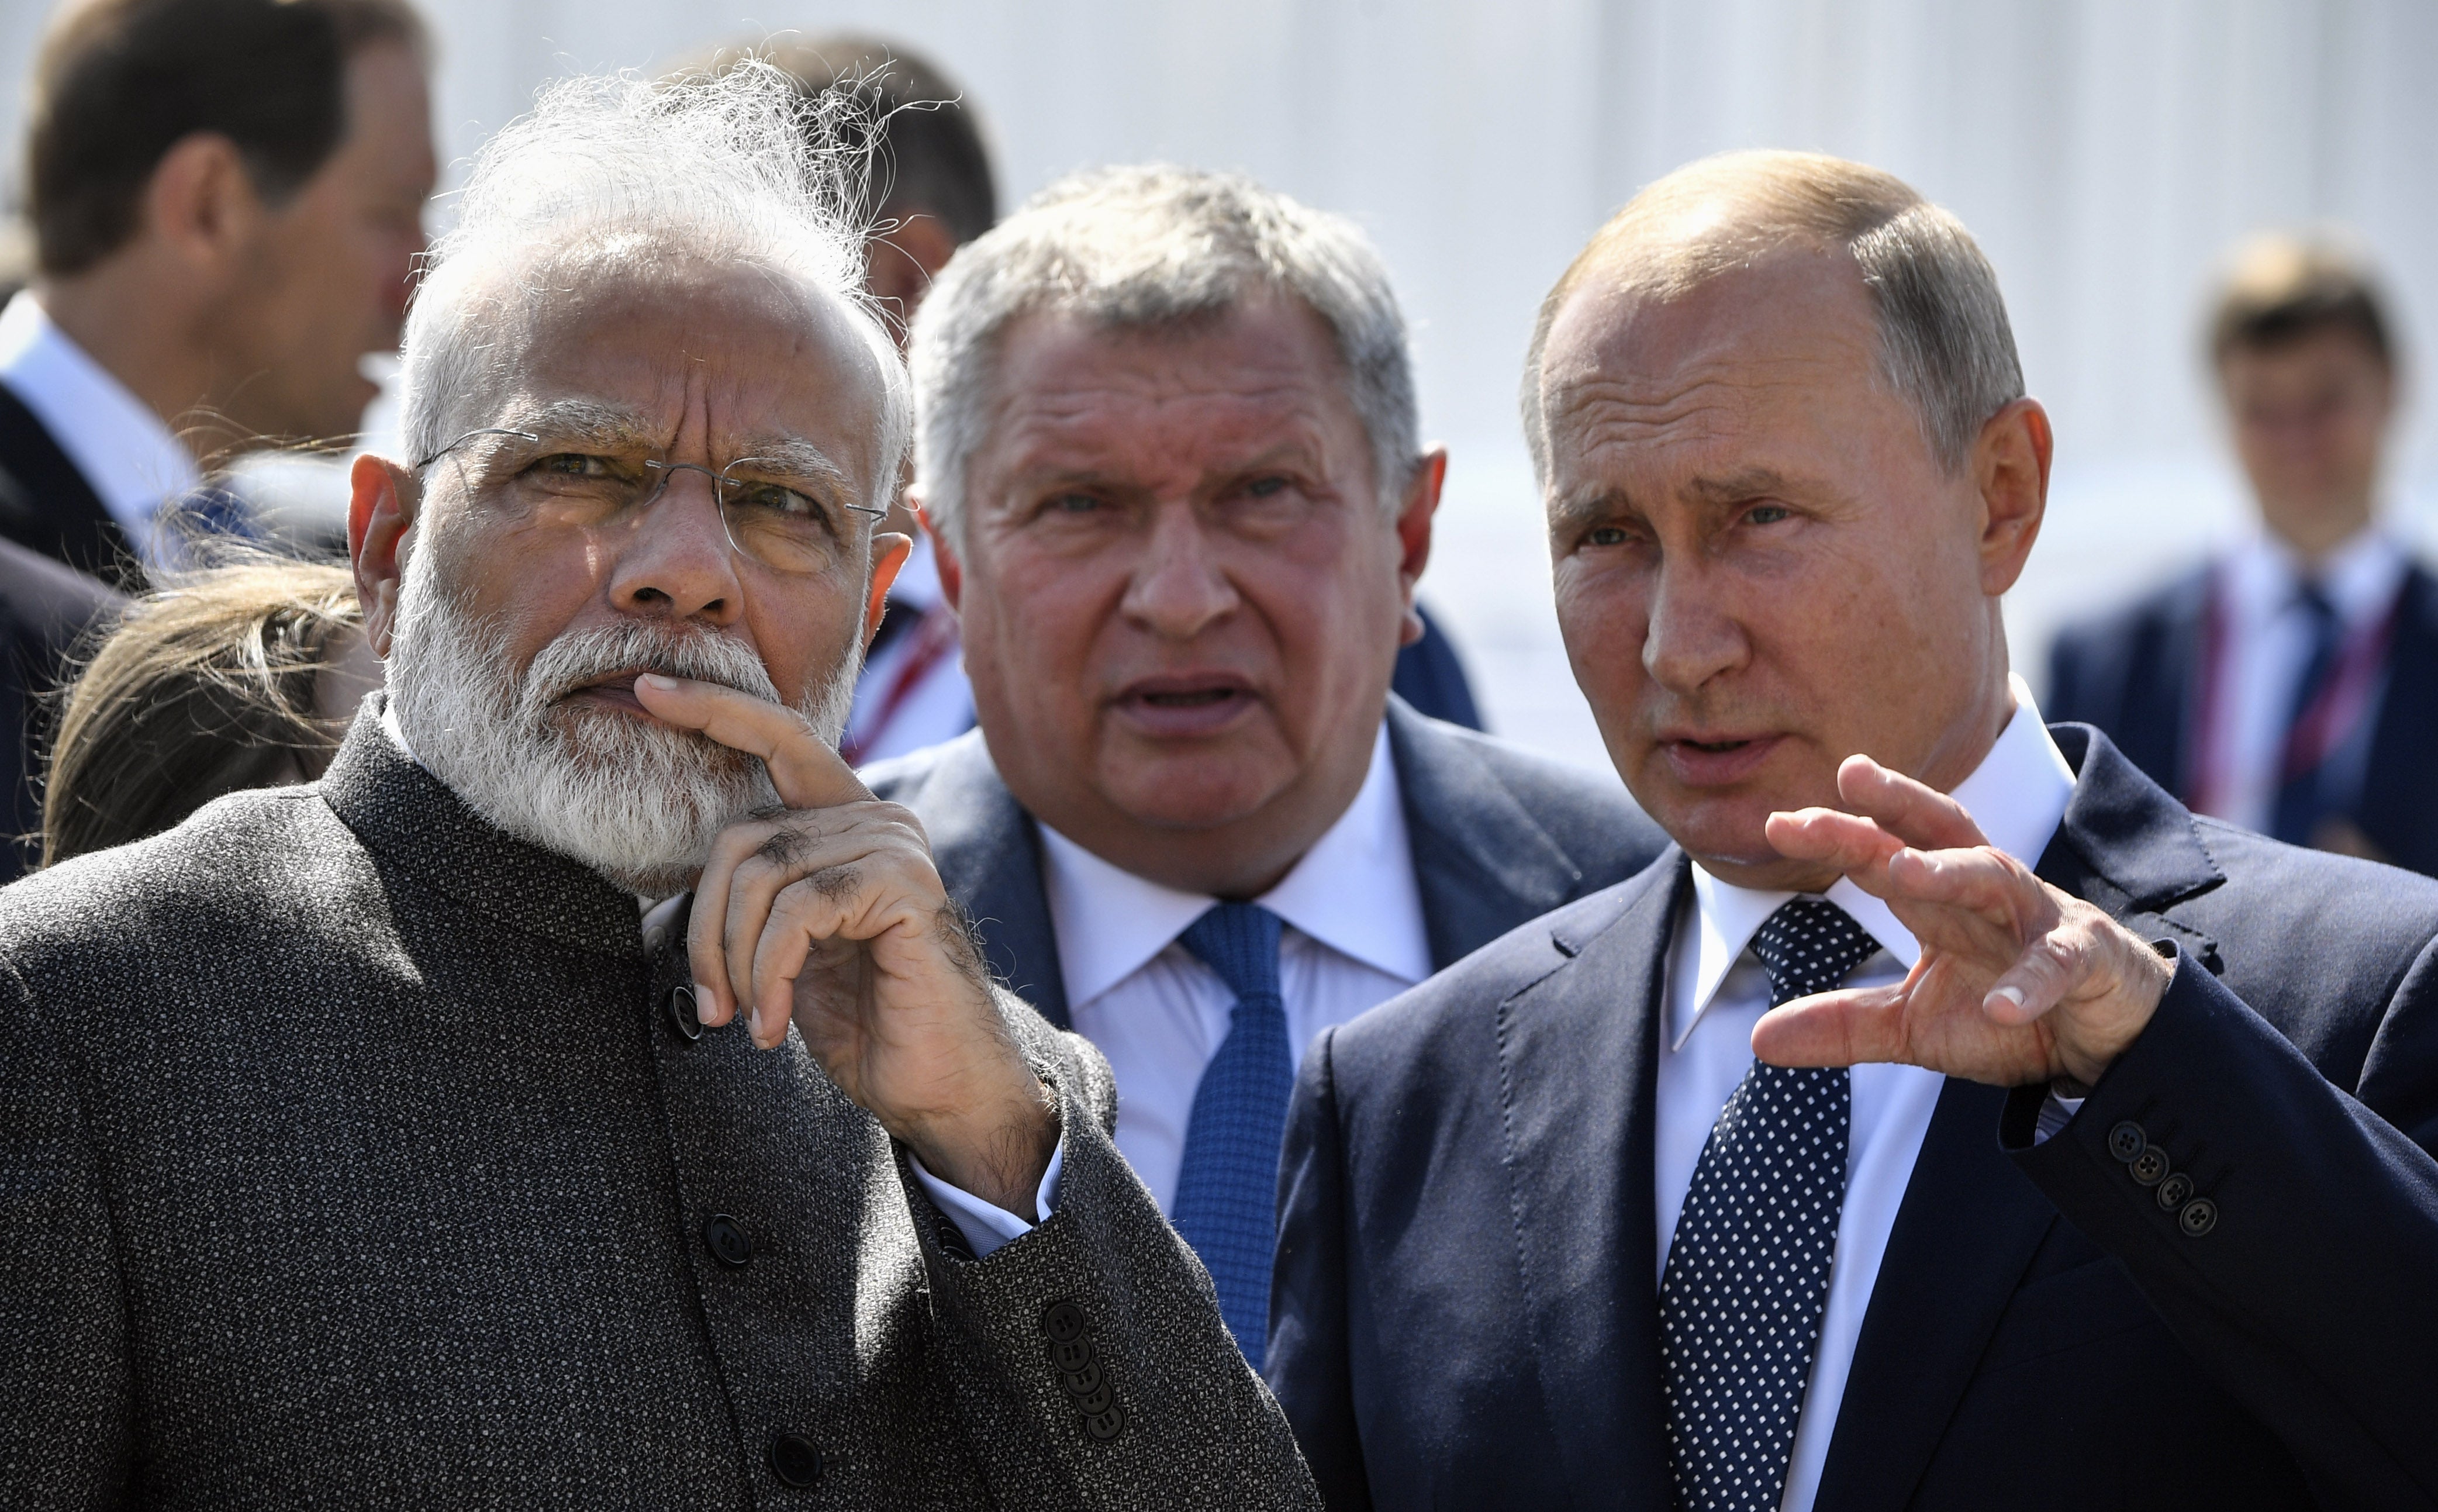 Narendra Modi and Vladimir Putin have remained close despite the ongoing conflict in Ukraine